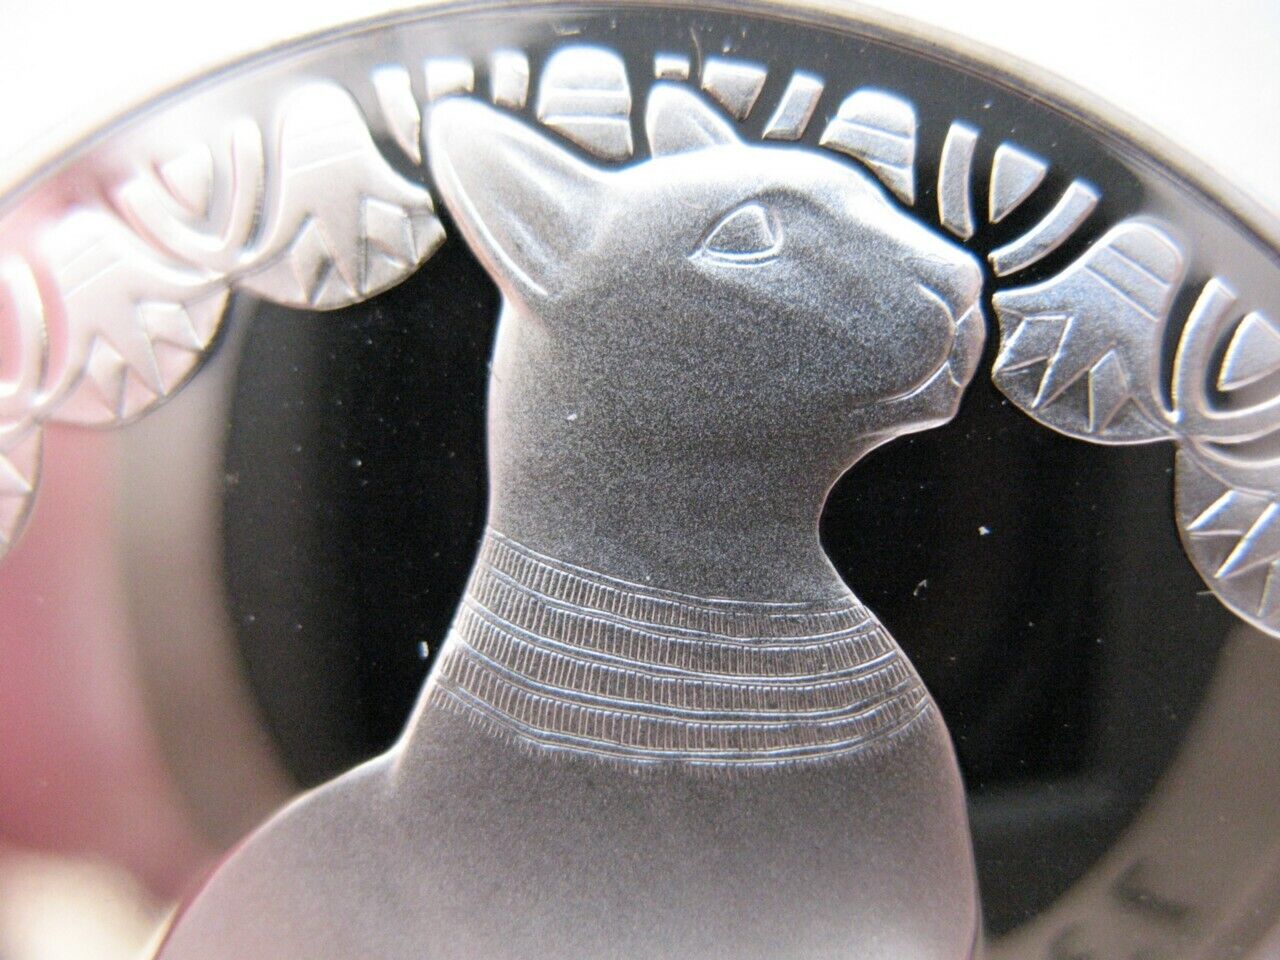 26 GRAMS.925 SILVER RARE FRANKLIN MINT PROOF EGYPT GOOD LUCK KITTY CAT COIN+GOLD